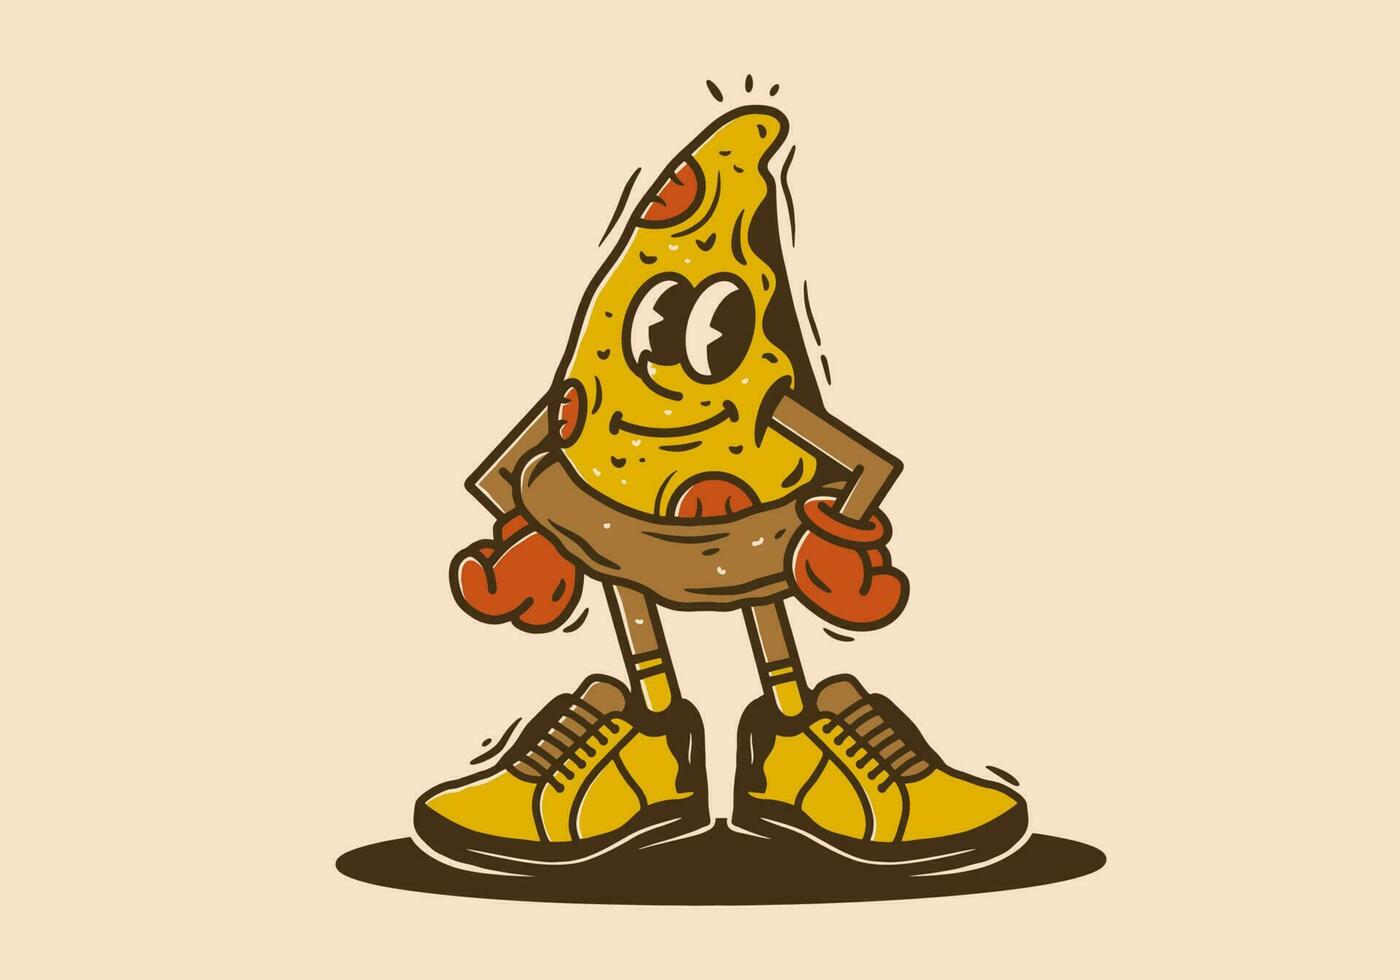 Mascot character of a pizza slice in an upright standing position vector